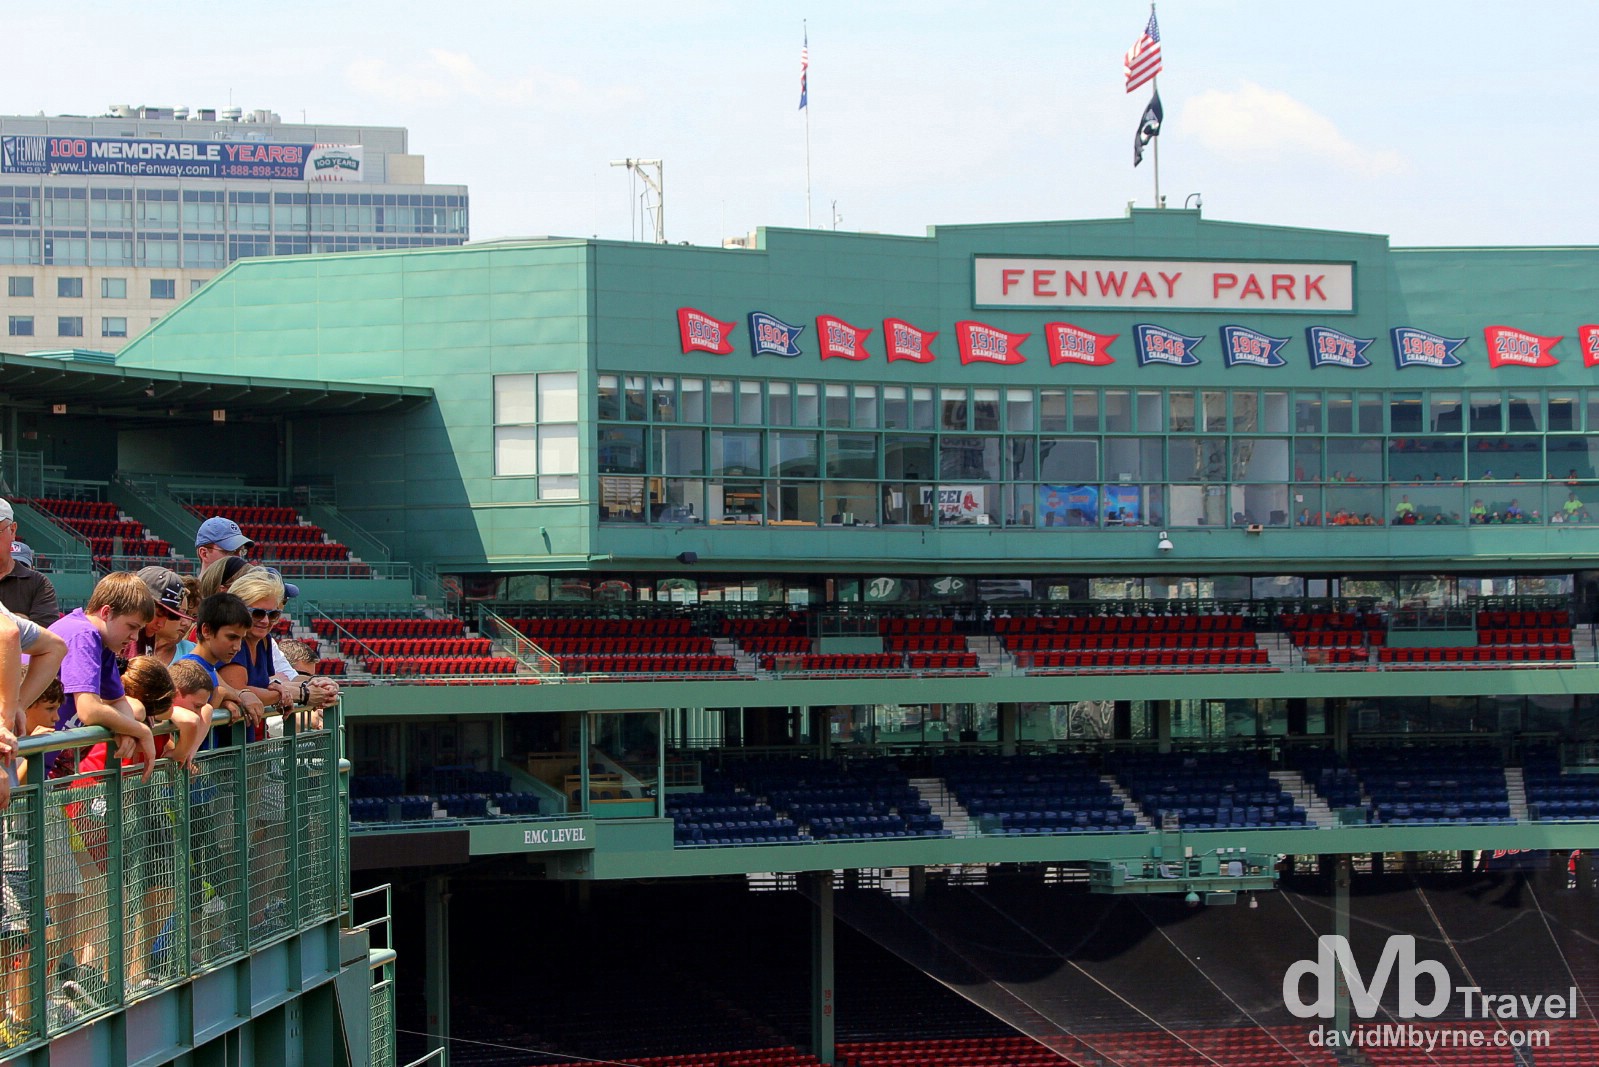 A section of a tour in Fenway Park, Fenway, Boston, Massachusetts, USA. July 17th 2013.